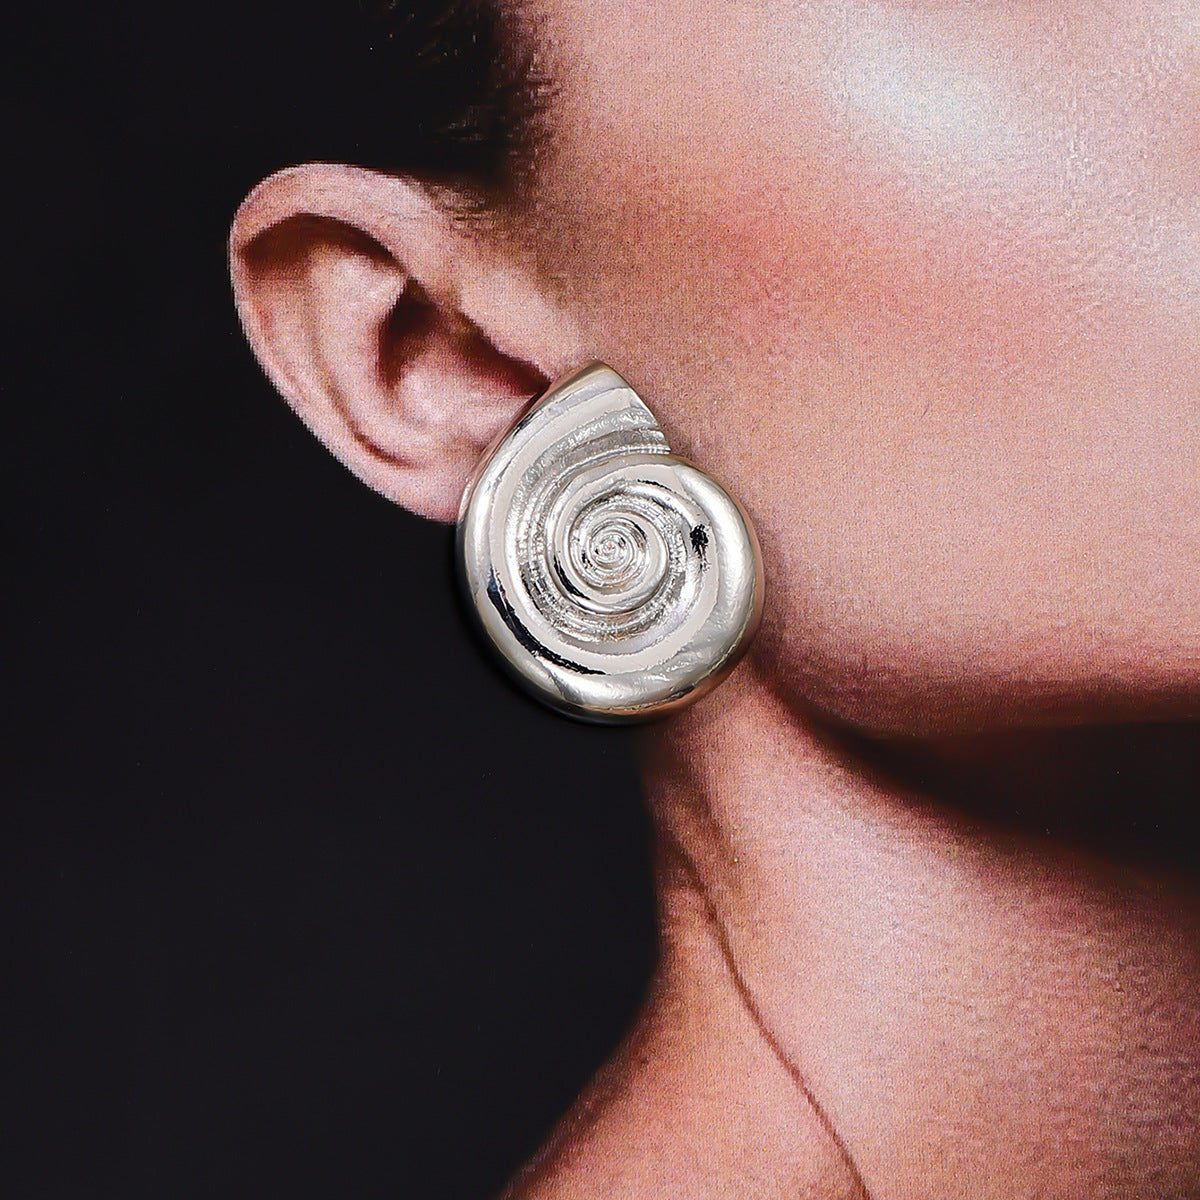 Exaggerated Spiral Pattern Earrings - Vienna Verve Collection